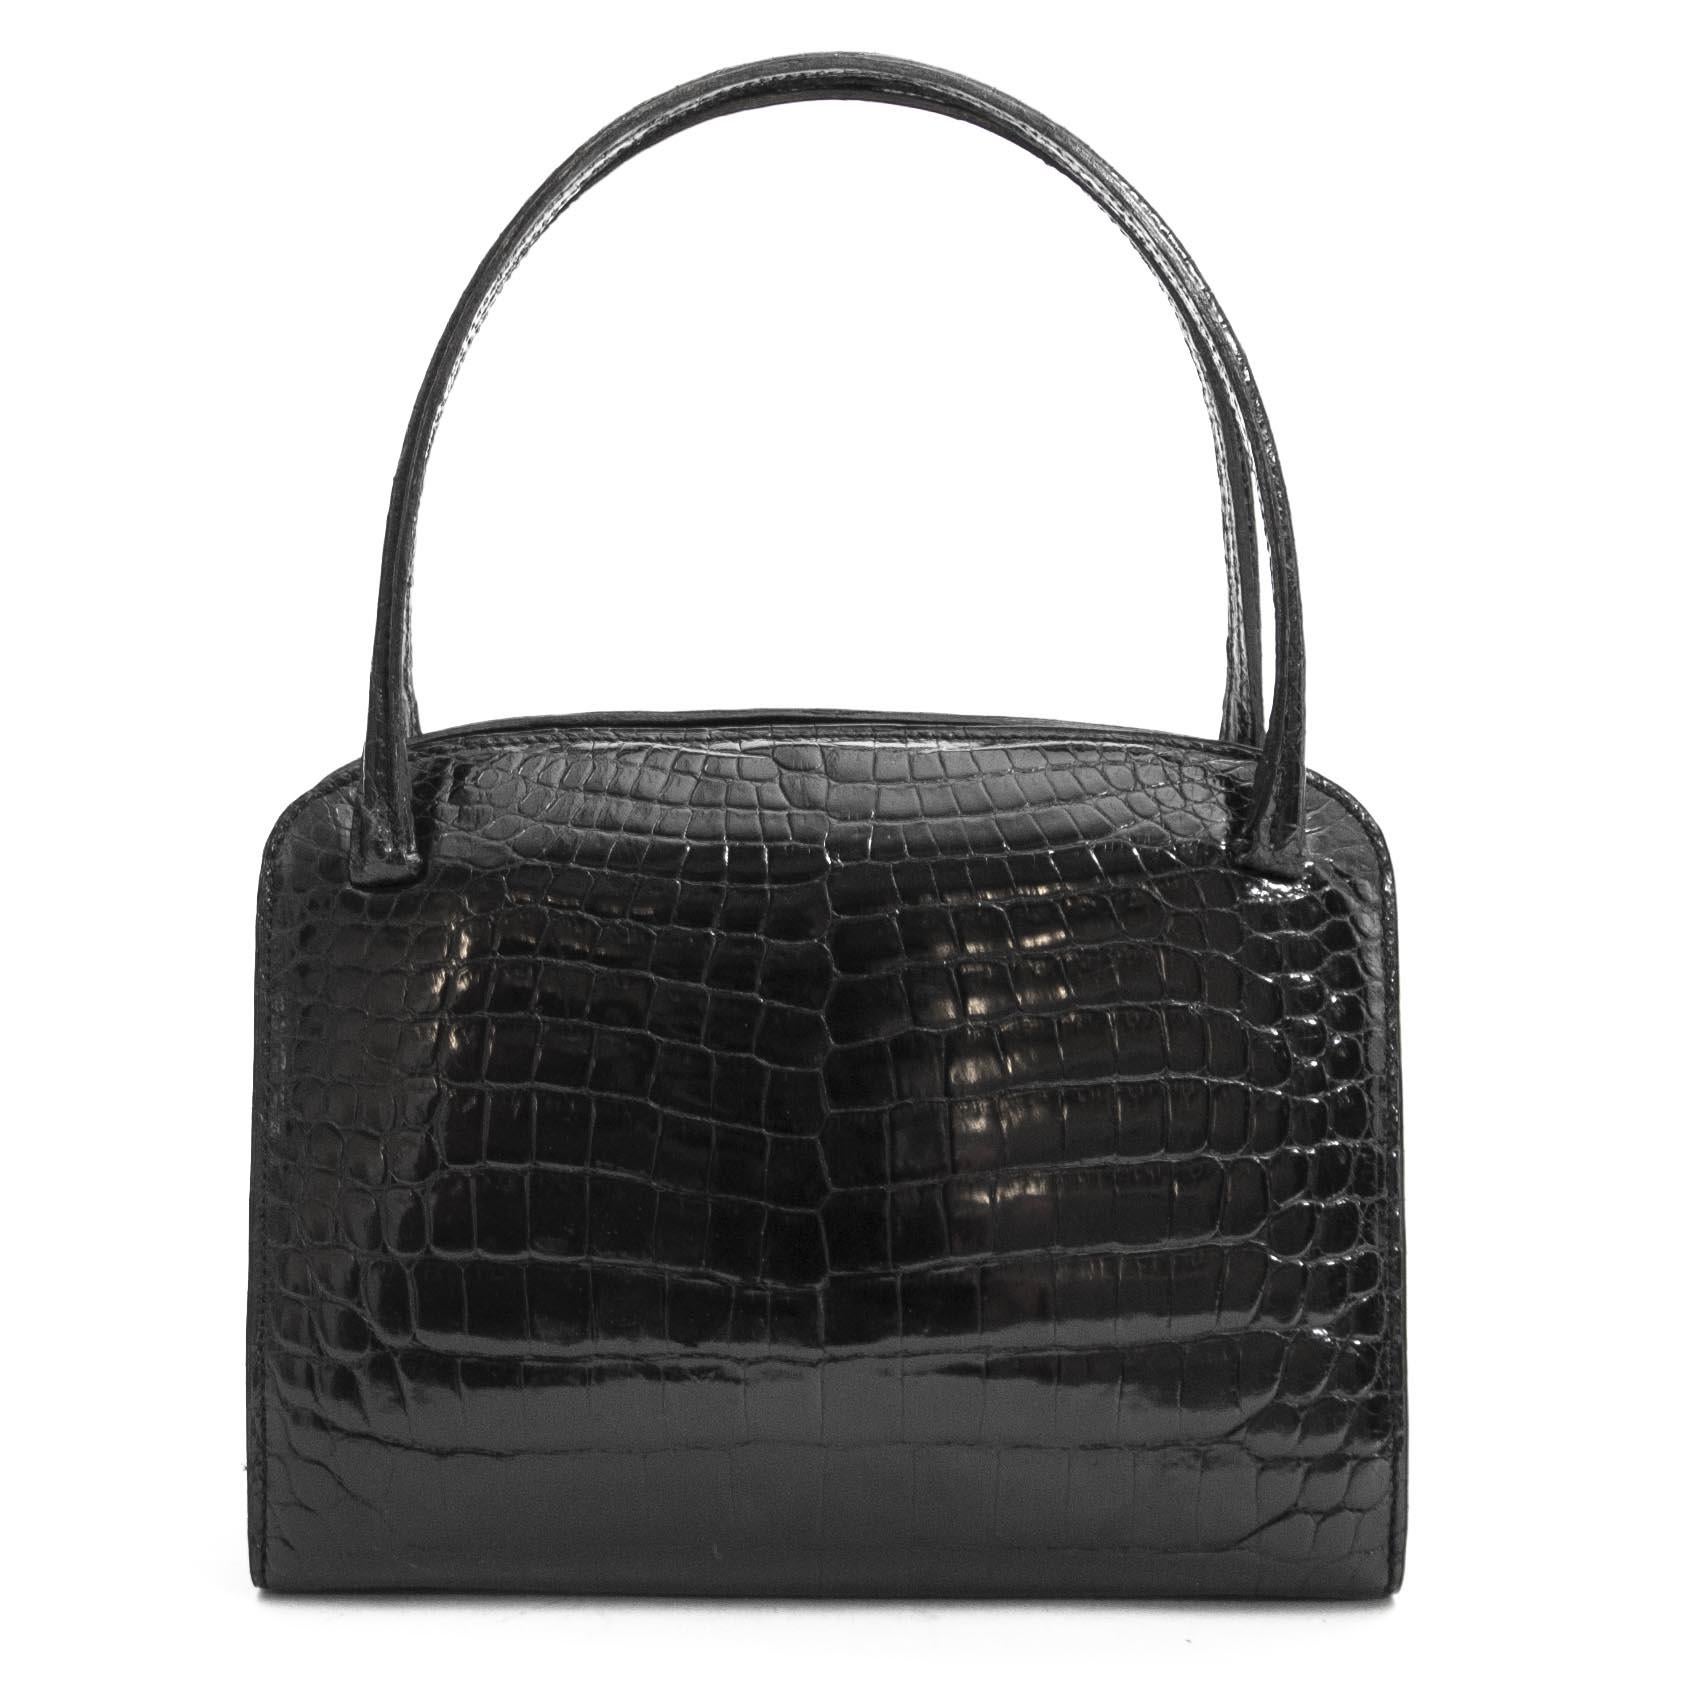 Good preloved condition

Delvaux Vintage Black Croco Bag

This stunning Delvaux bag comes in black croco leather.
The interior features black leather and three big compartments with two extra small compartments.

A beautiful and timeless bag that